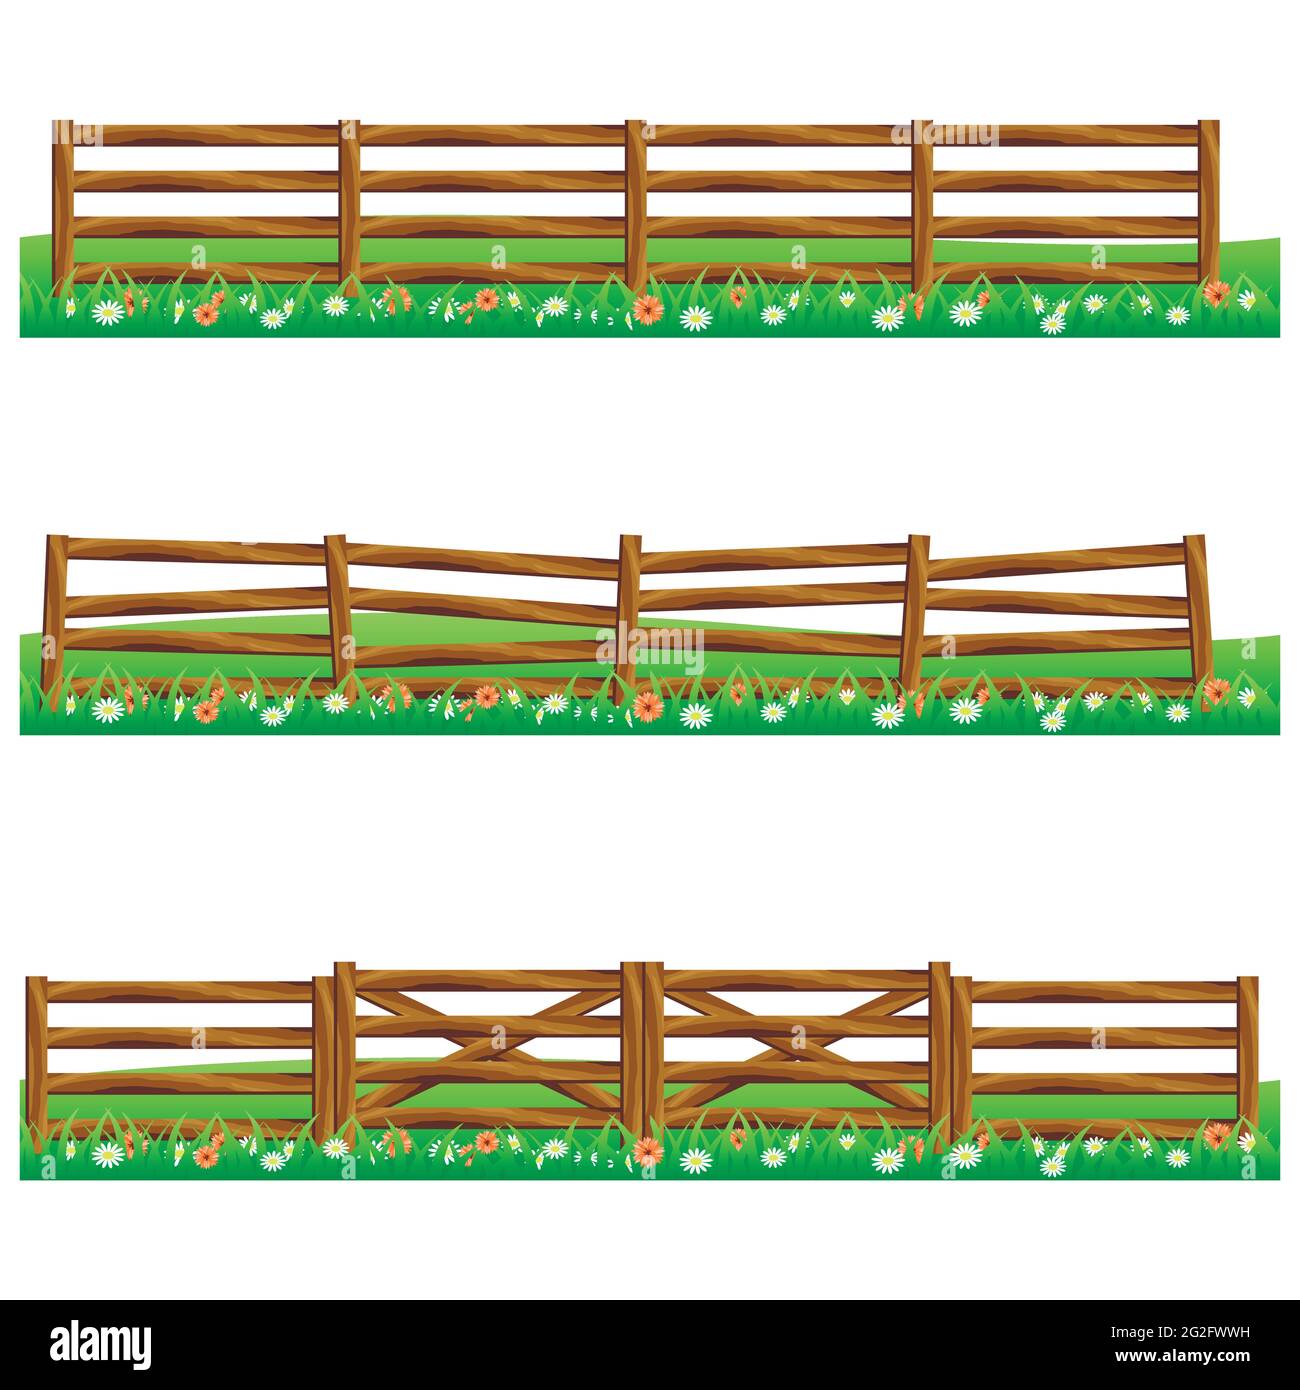 Set of farm wooden fences isolated on white background with grass and flowers.Fits as scene elements for cartoon or game asset. Vector illustration. Stock Vector